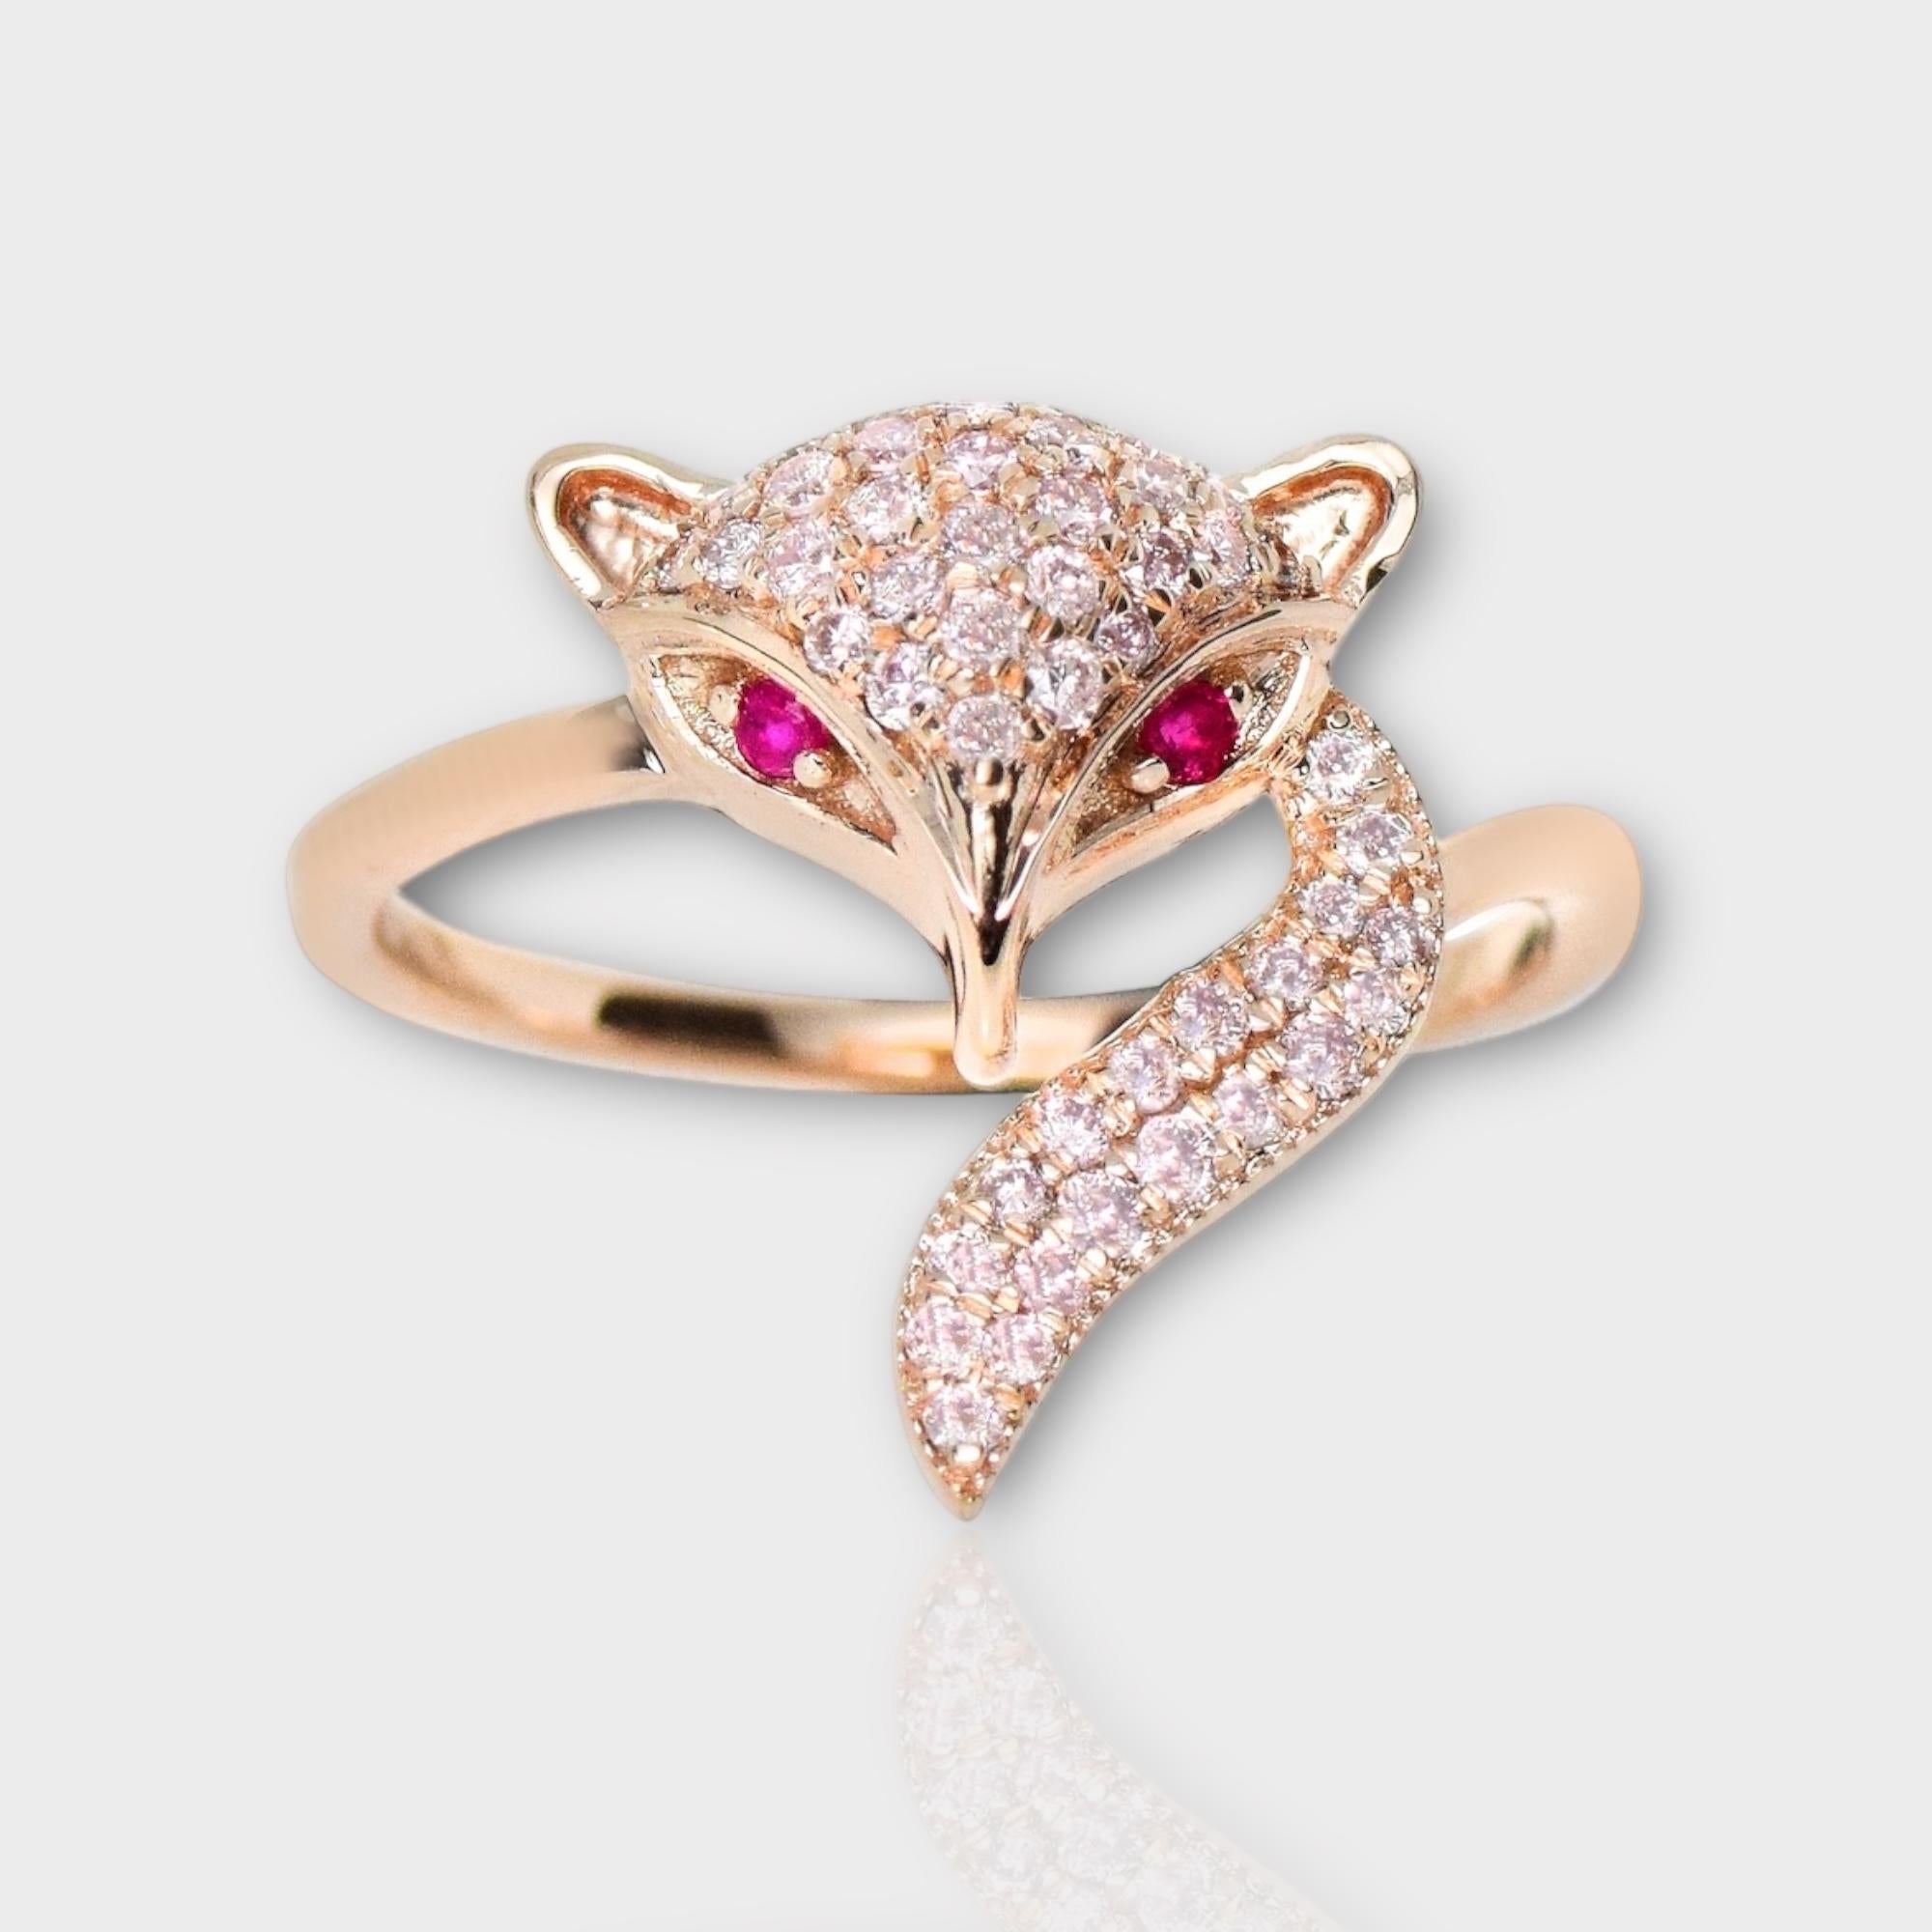 *IGI 14K 0.31 ct Natural Pink Diamonds Fox Design  Antique Art Deco Ring*

This band features a stunning design with a fox crafted from 14K rose gold. It is set with natural pink diamonds weighing 0.31 carats.

This necklace features colorful